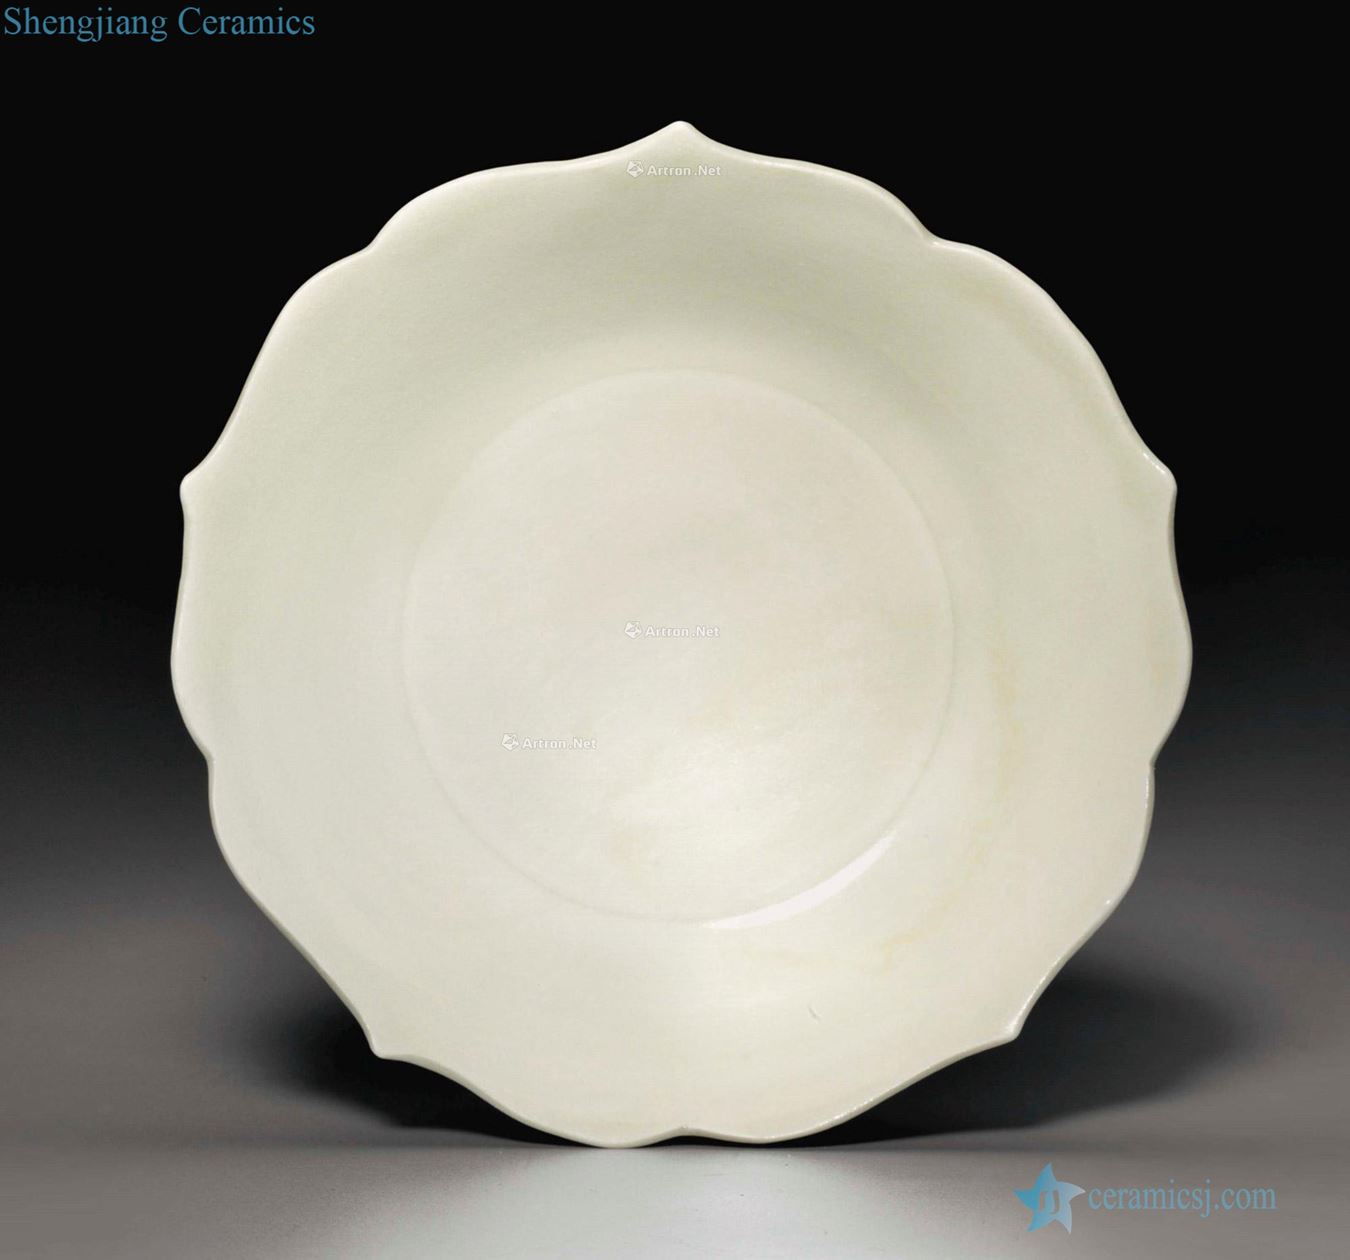 FIVE DYNASTIES (AD 907 ~ 960). A XING, A SHALLOW DISH